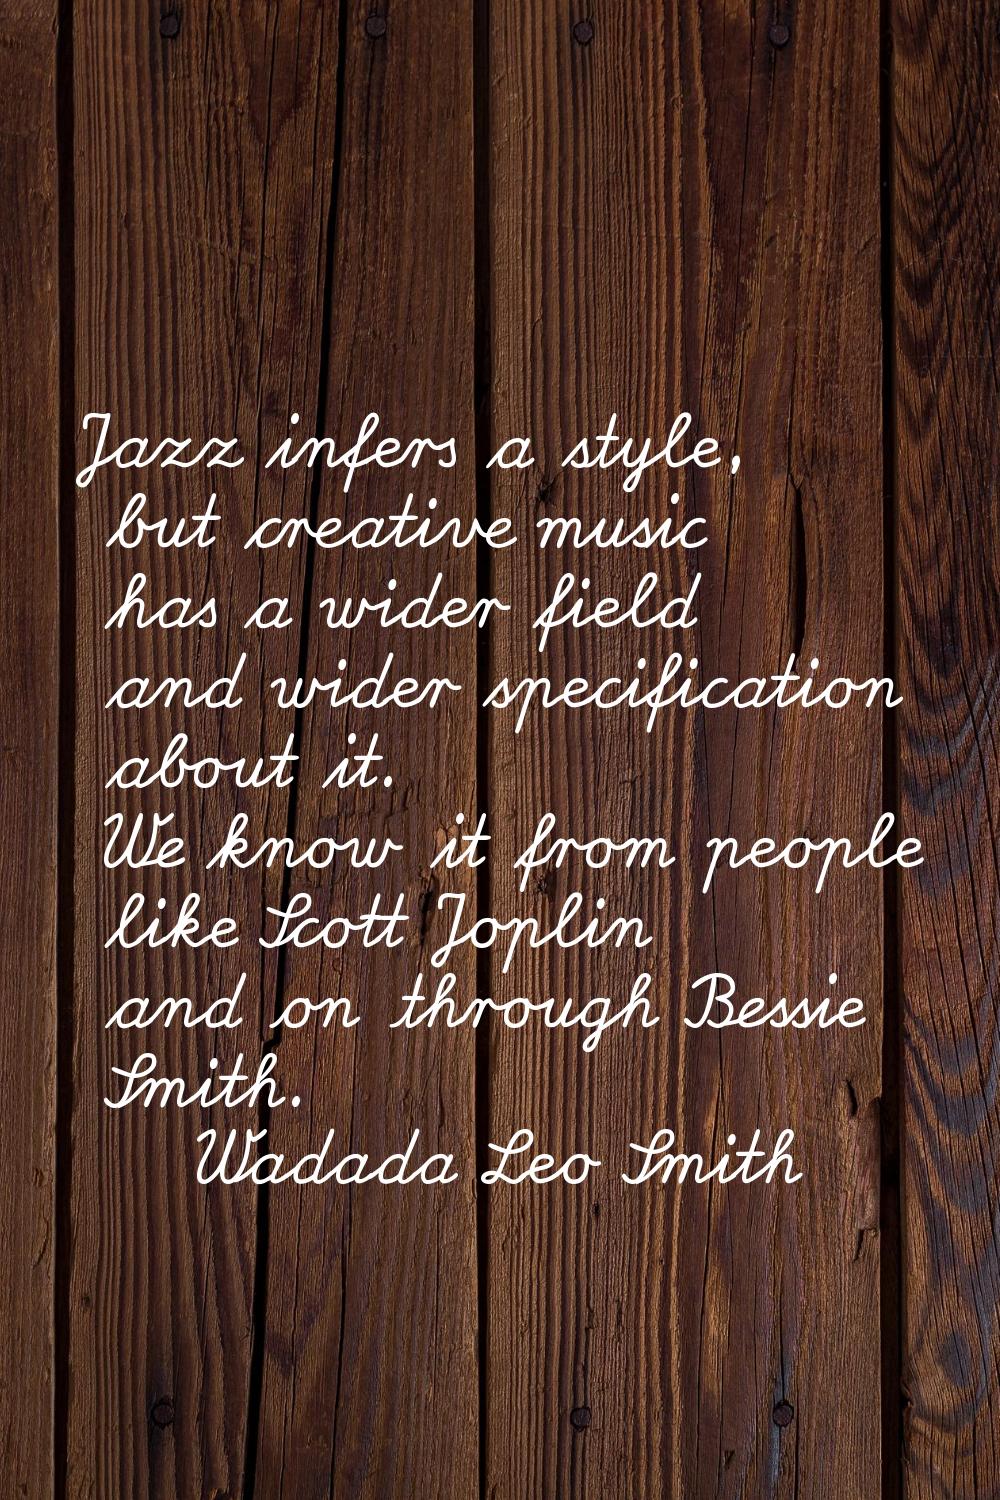 Jazz infers a style, but creative music has a wider field and wider specification about it. We know